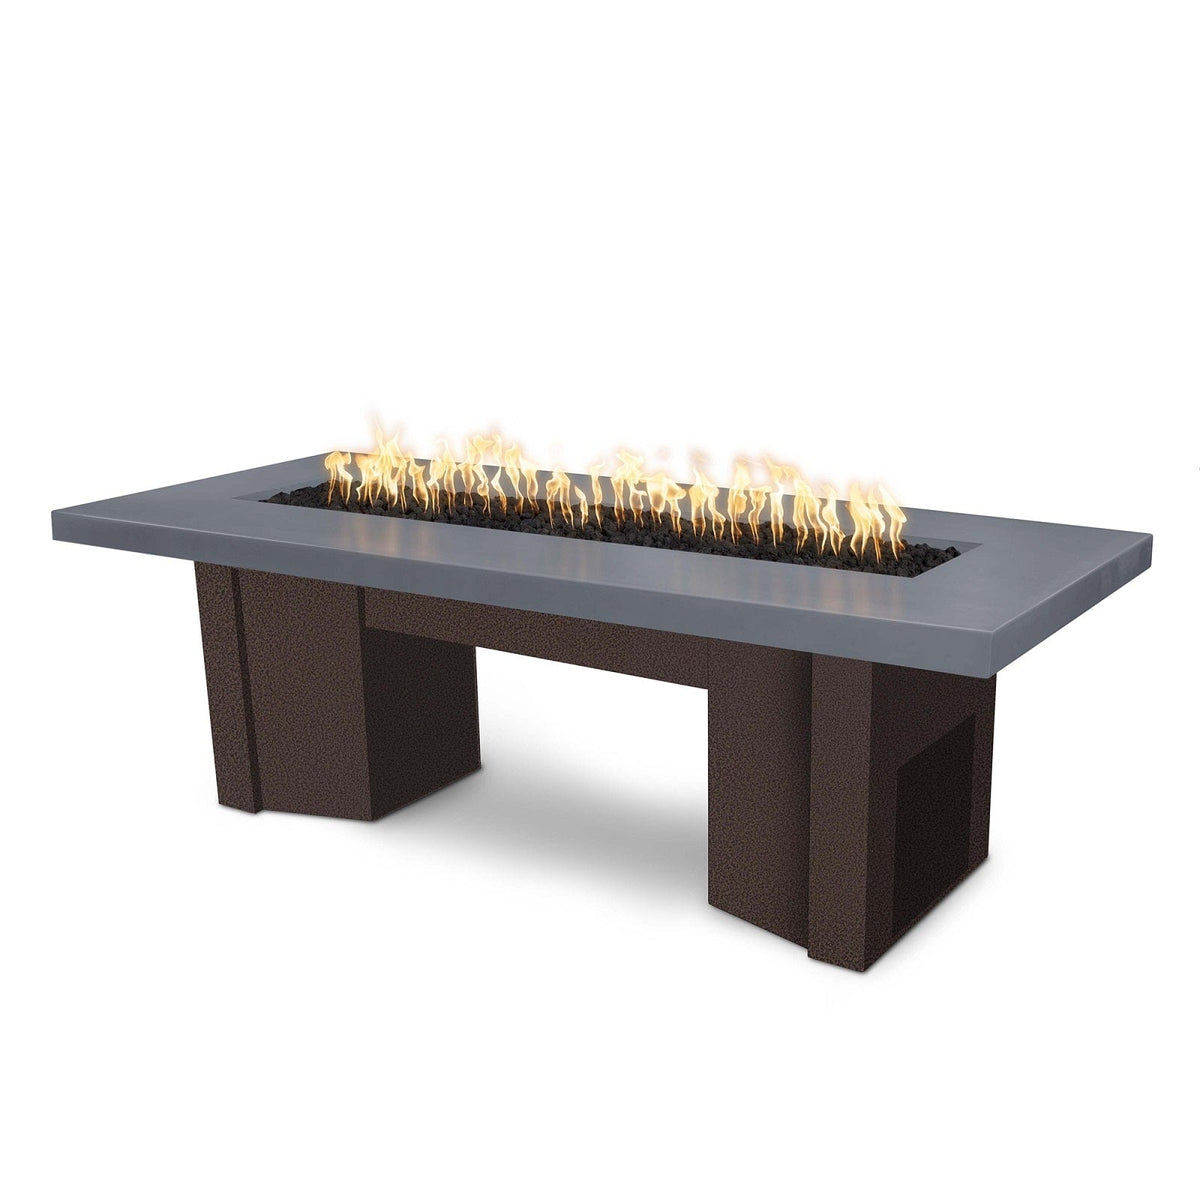 The Outdoor Plus Fire Features Gray (-GRY) / Copper Vein Powder Coated Steel (-CPV) The Outdoor Plus 78&quot; Alameda Fire Table Smooth Concrete in Liquid Propane - Match Lit with Flame Sense System / OPT-ALMGFRC78FSML-LP